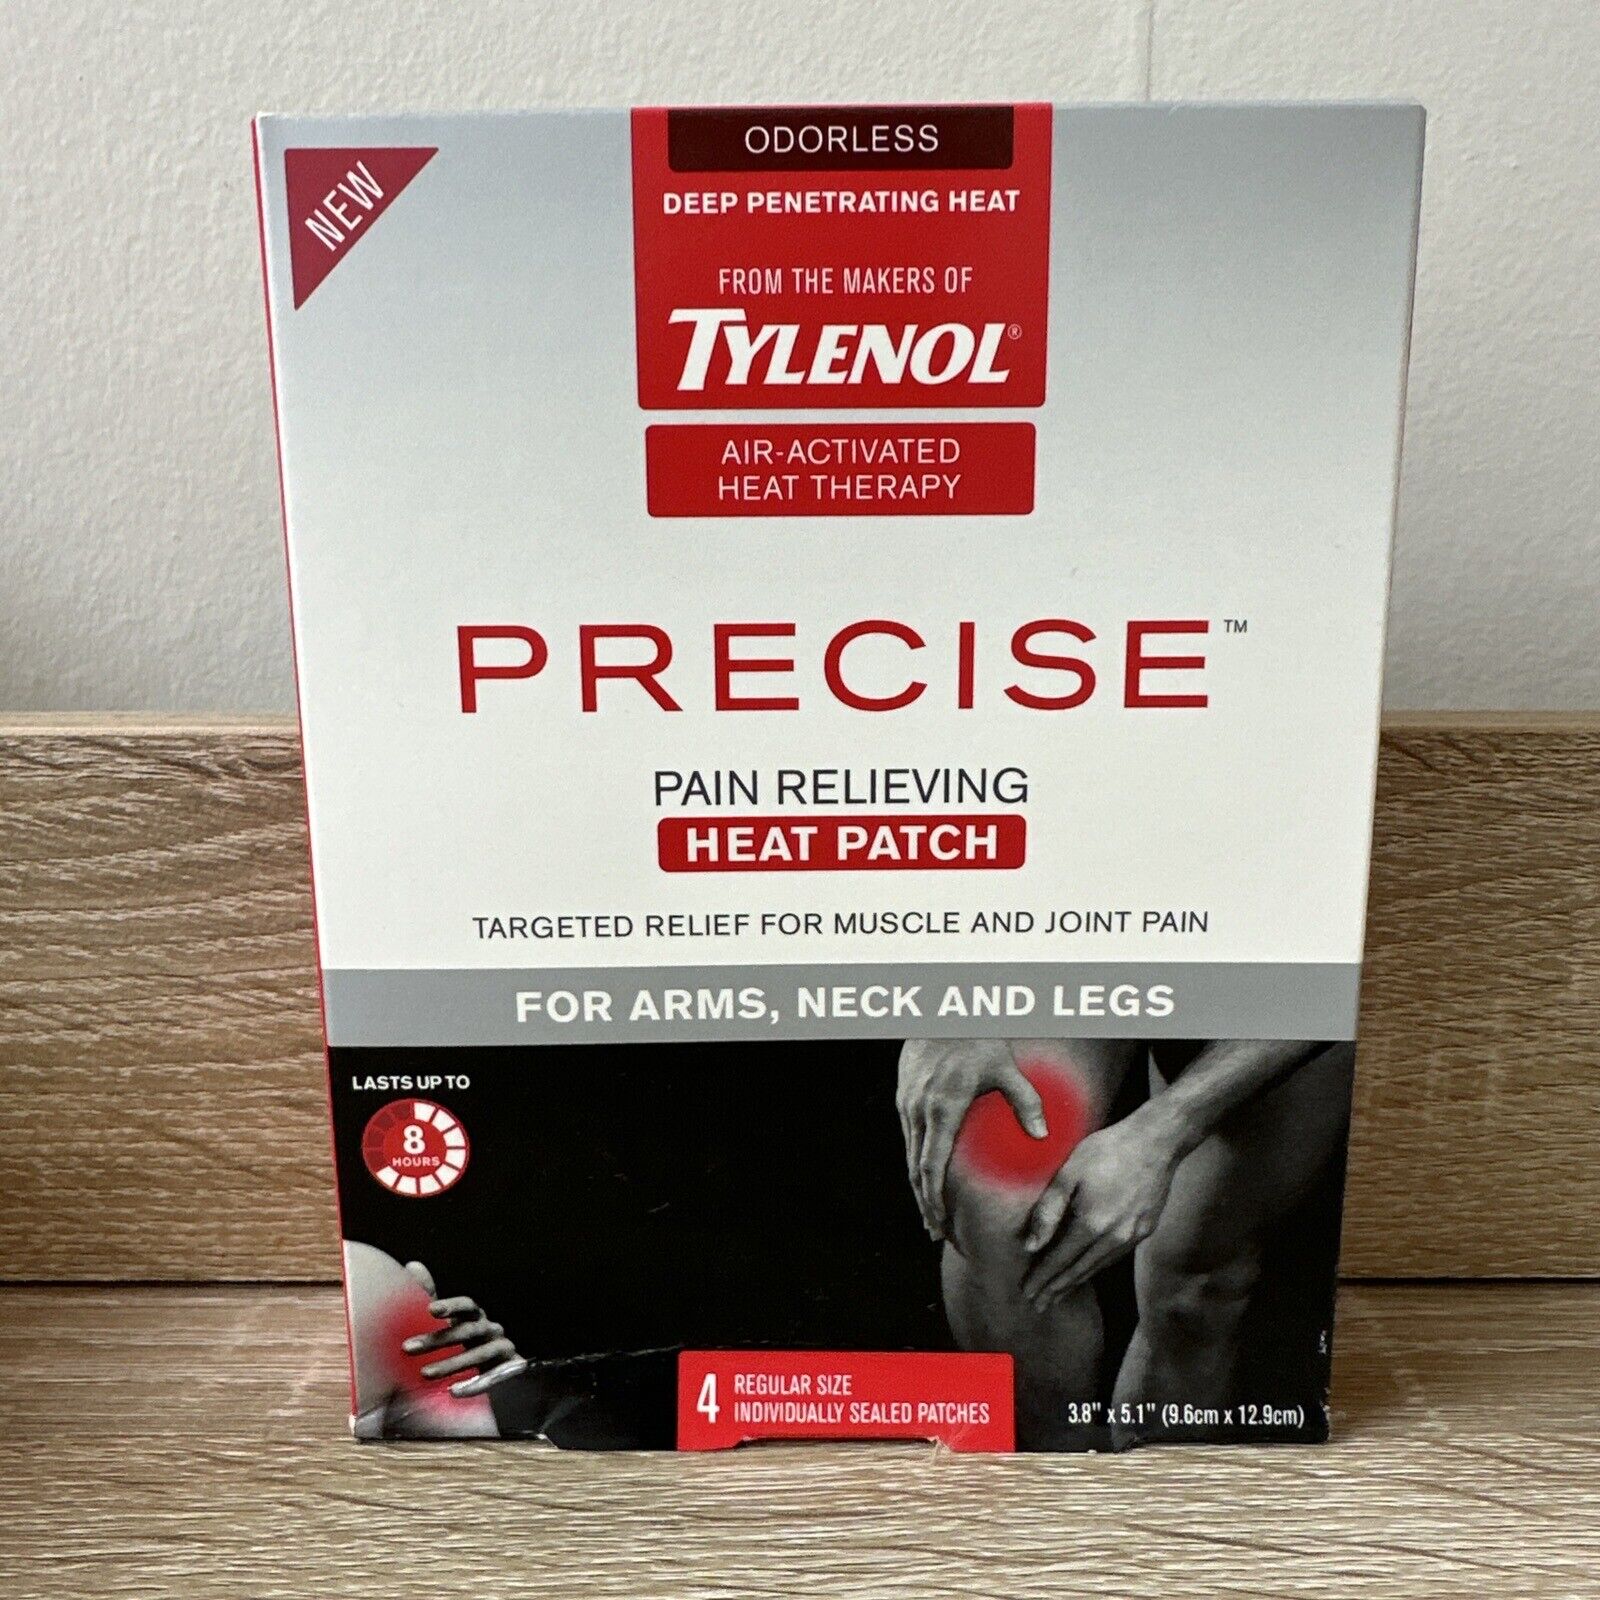 Tylenol Precise Pain Relieving Heat Patch arms neck legs - COLLECTIBLE - One Box